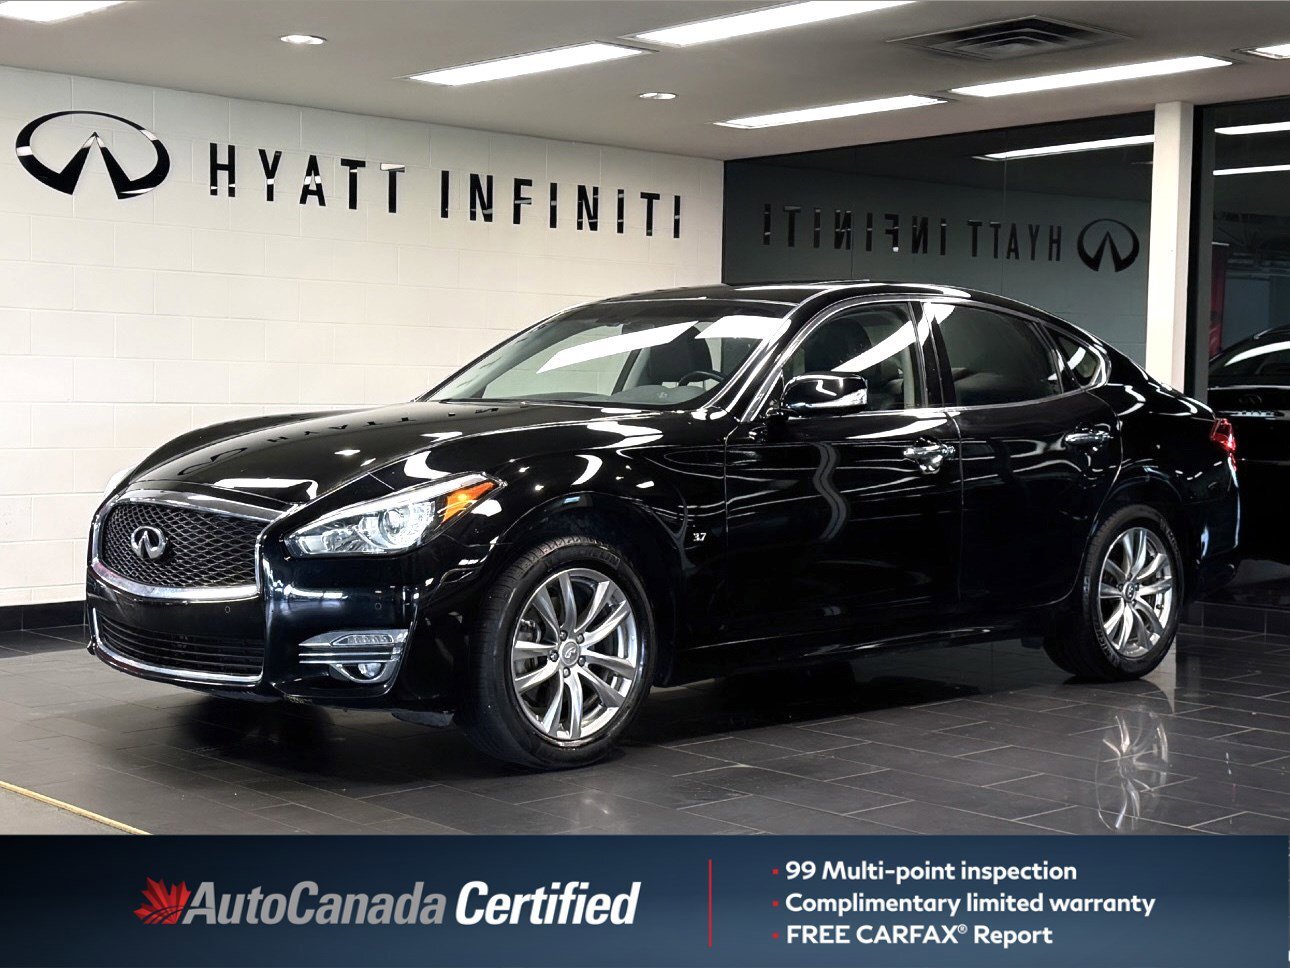 2019 Infiniti Q70 LUXE - No Accidents | Heated & Cooled Front Seats 